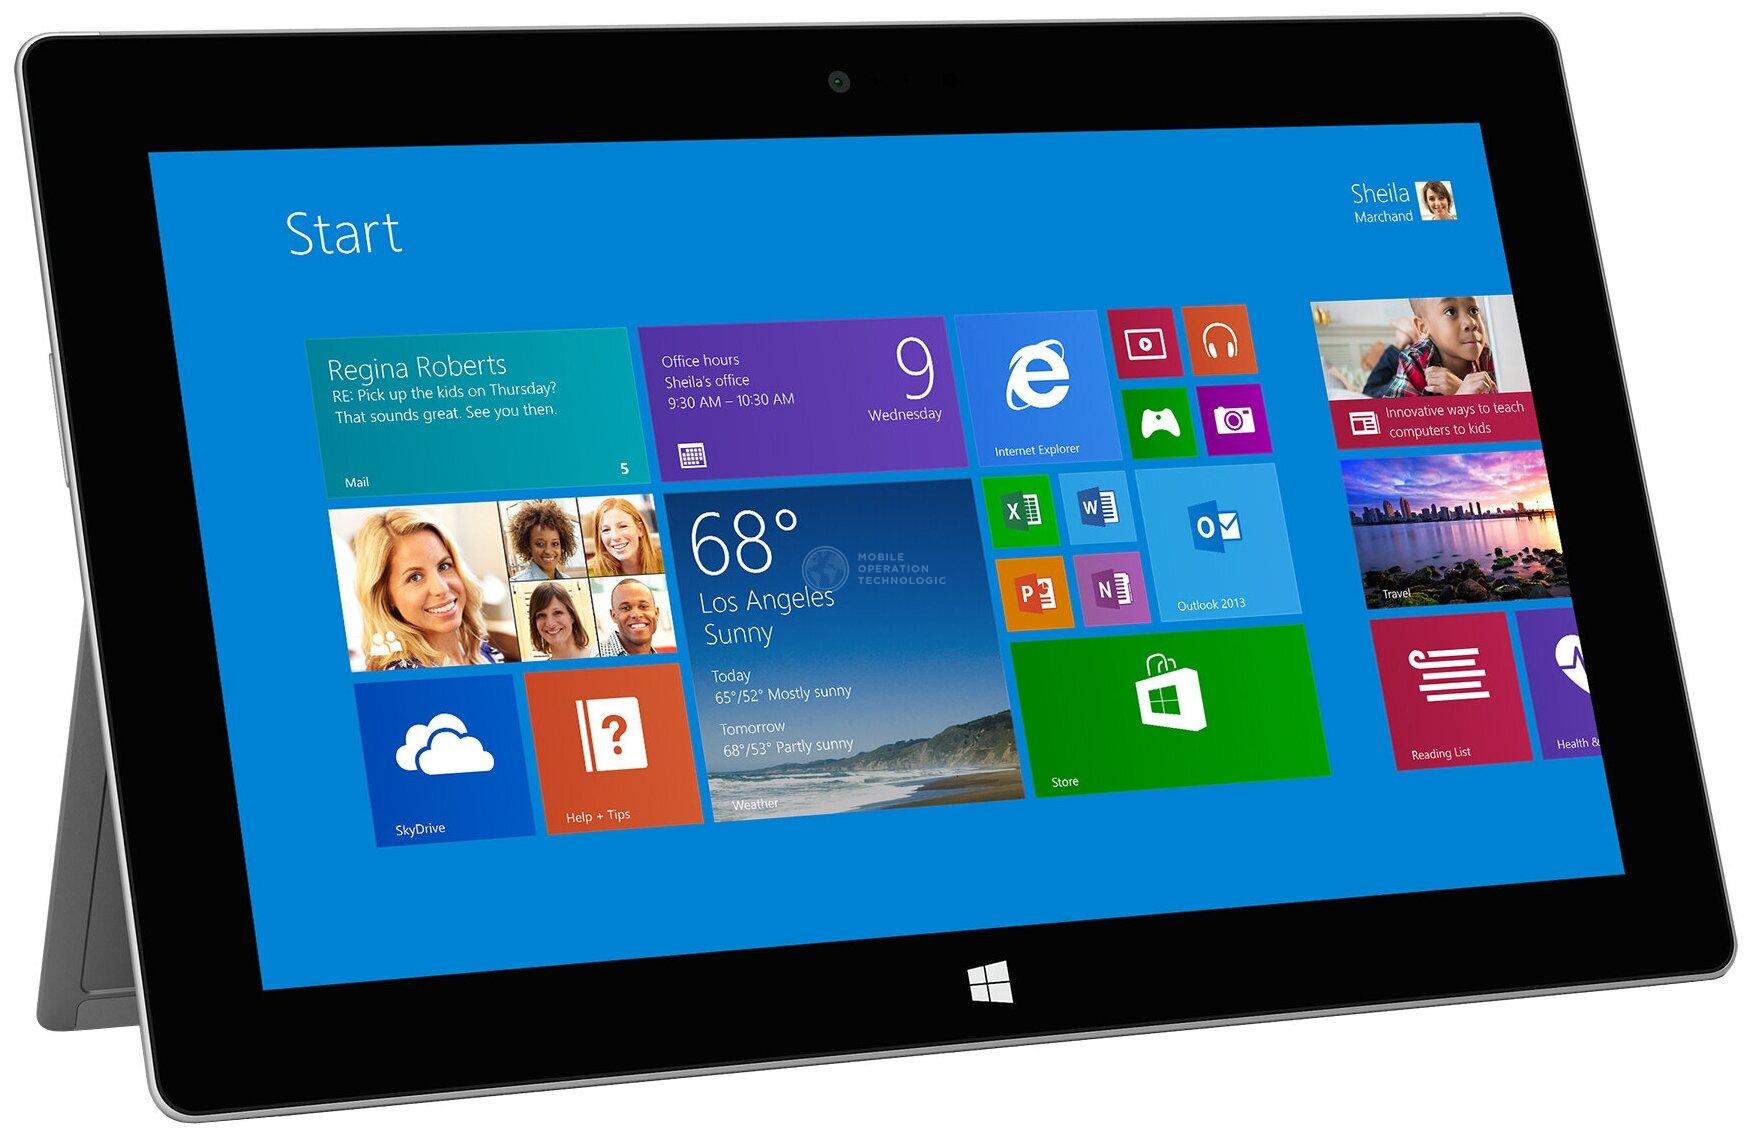 Surface 2 4G